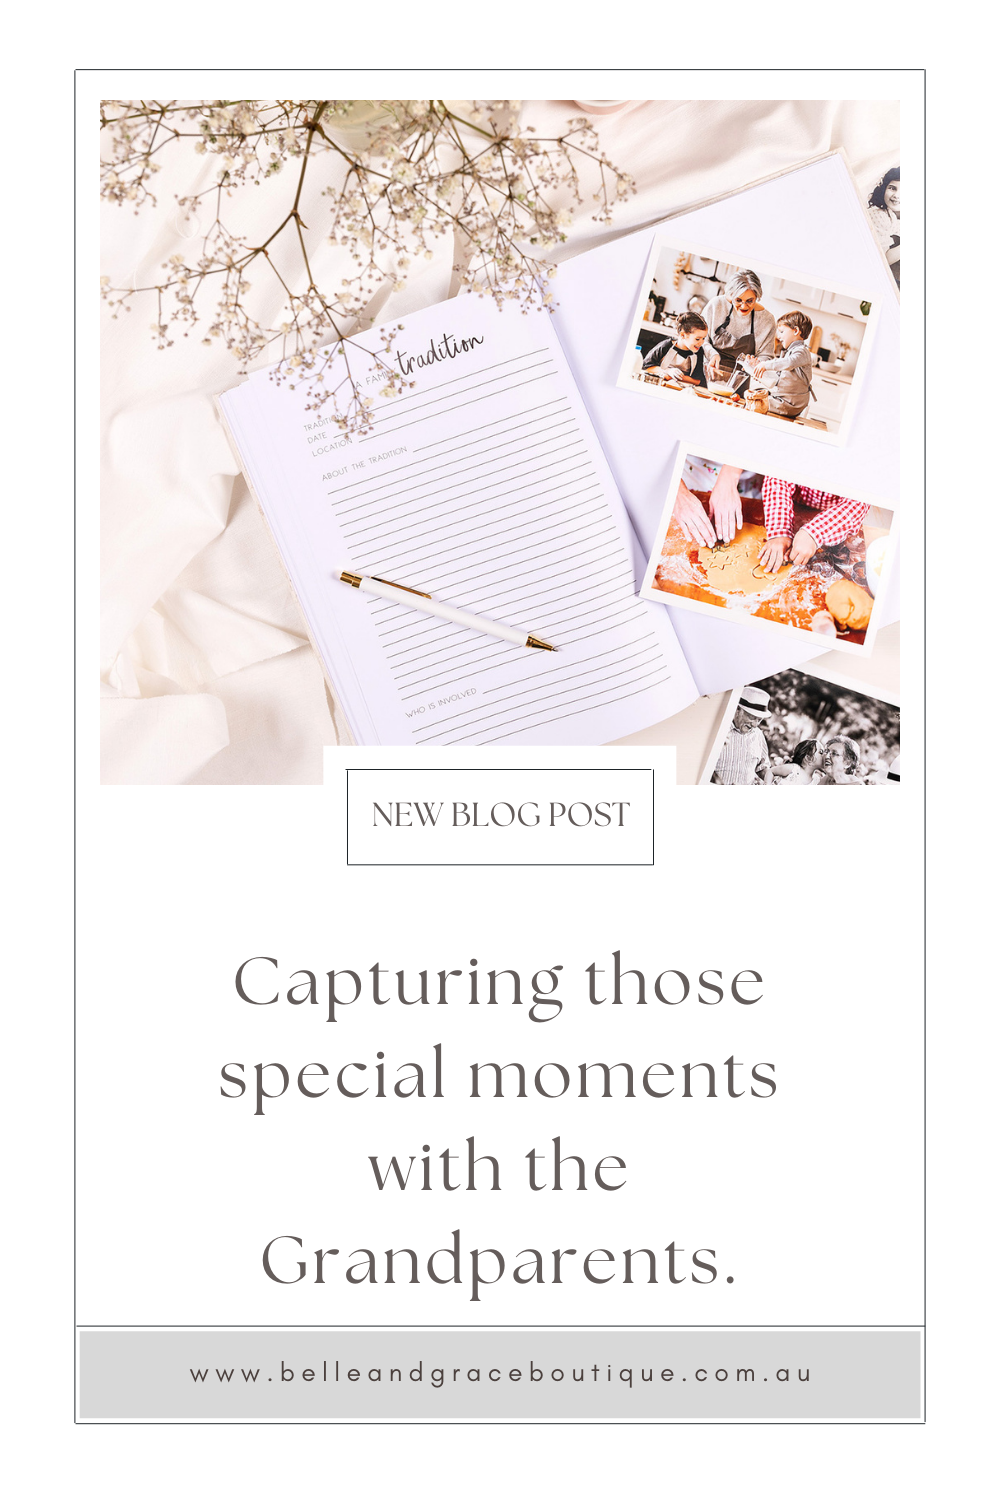 Grandparents Journal - Capturing those special moments with the Grandparents